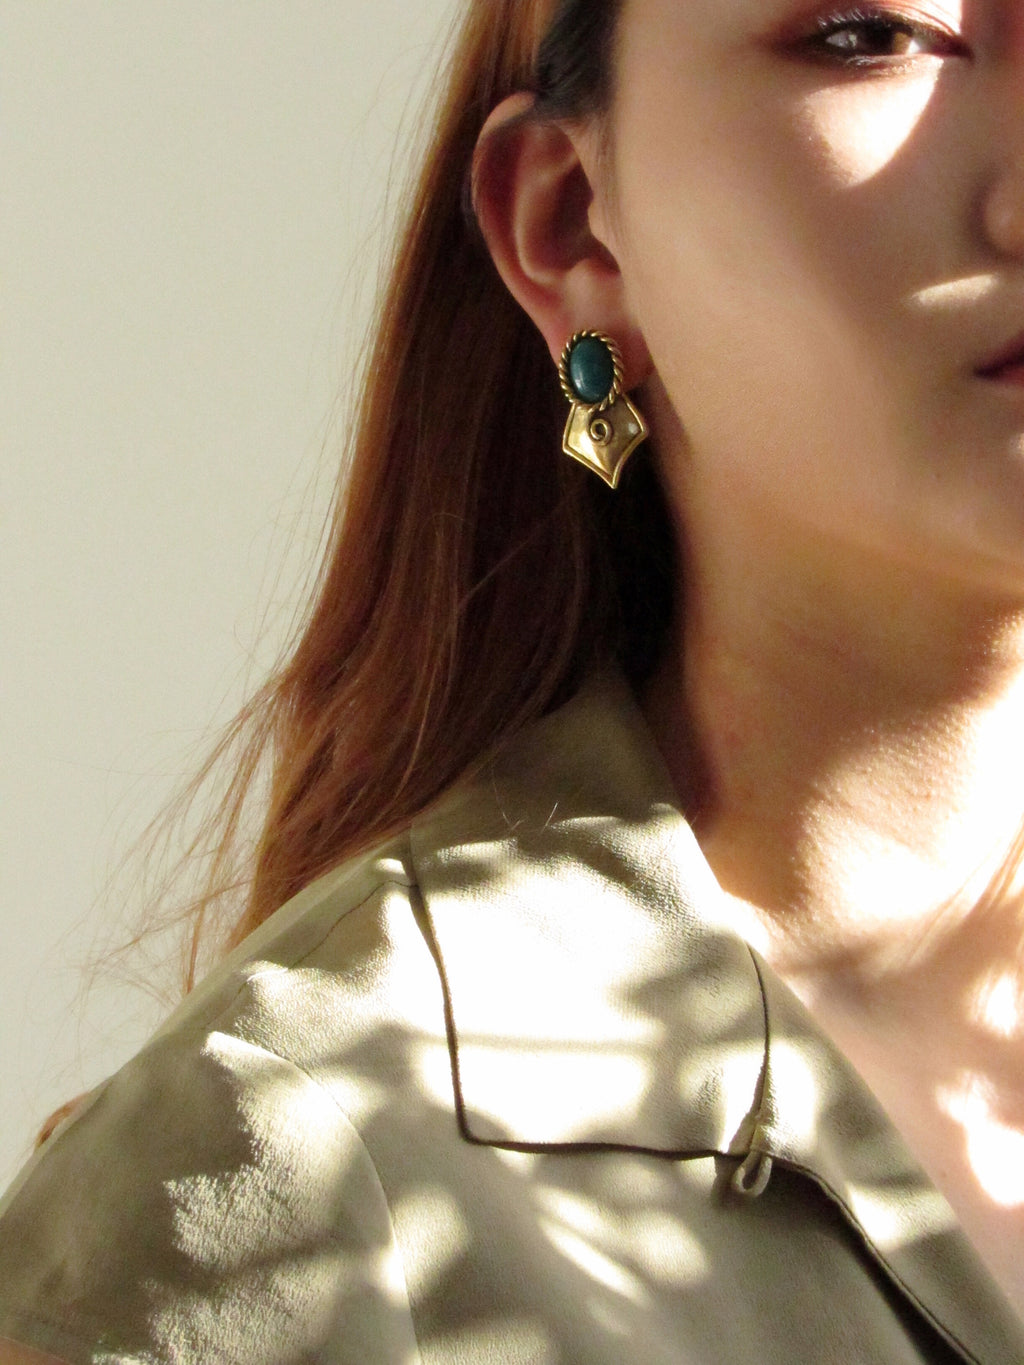 Vintage Statement Earrings with Blur Gem